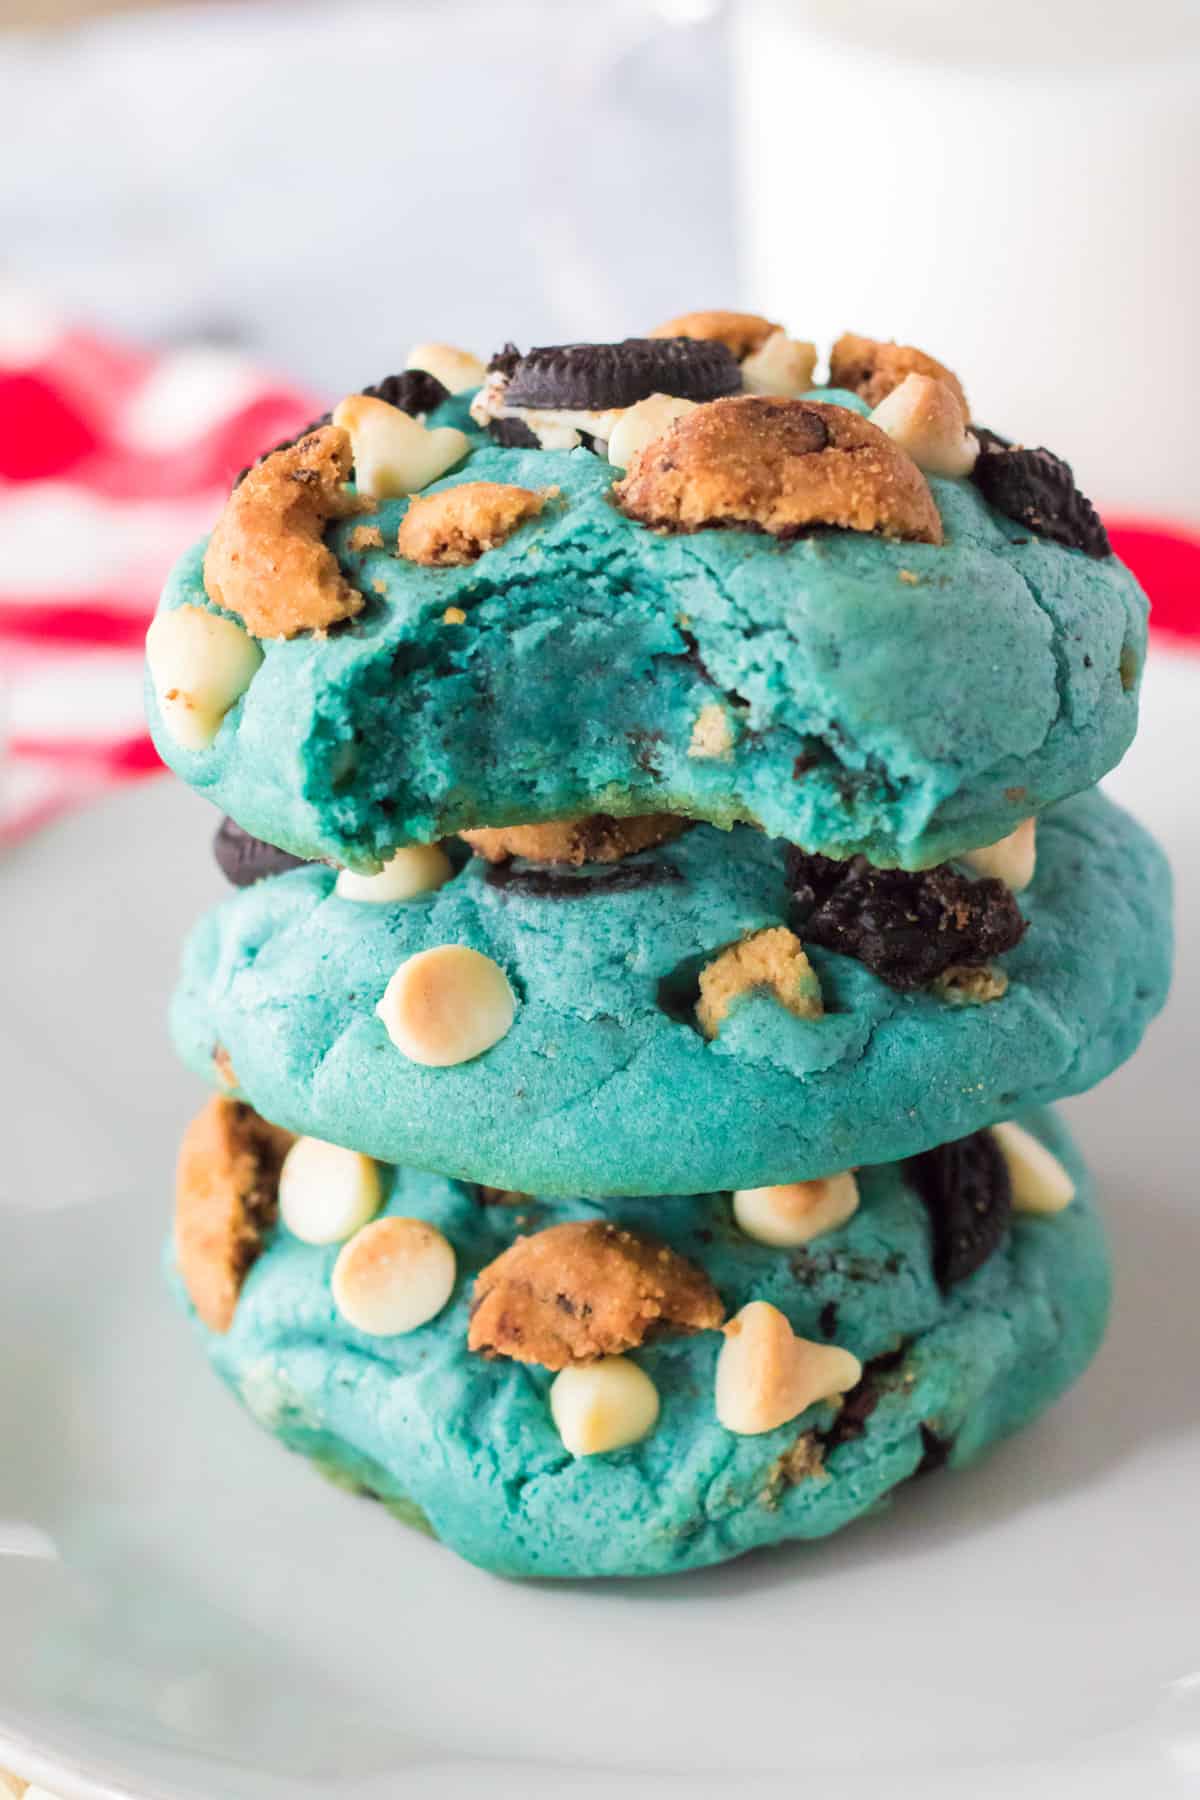 Thick blue cookie monster cookies stacked on top of one another with a bite taken out of the top cookies and a glass of milk in the background.